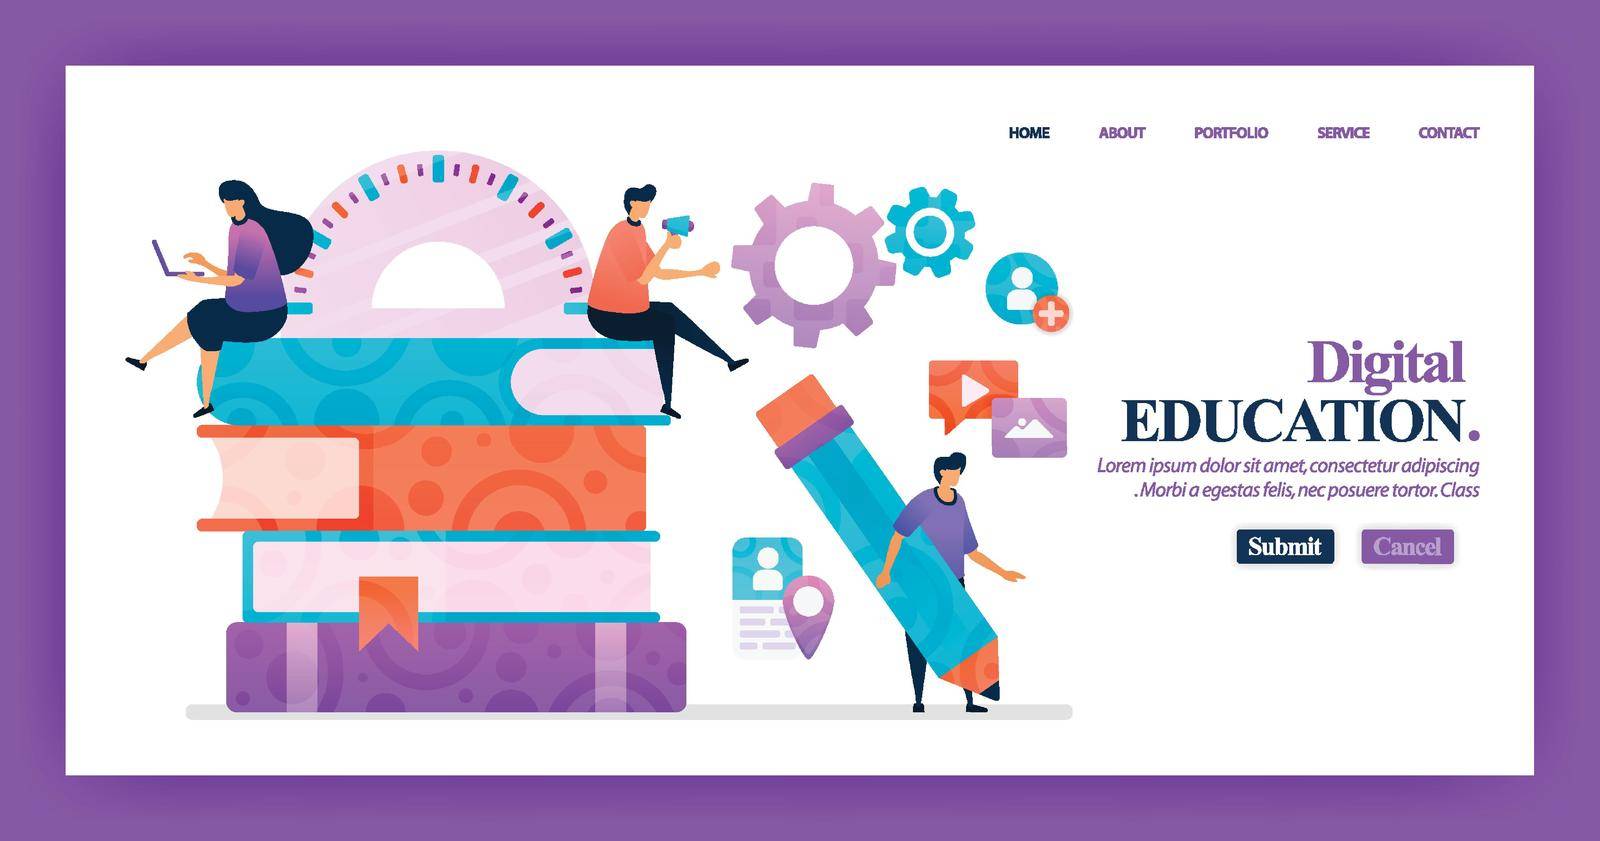 Landing page vector design of Digital education. Easy to edit and customize. Modern flat design concept of web page, website, homepage, mobile apps. character cartoon Illustration flat style.